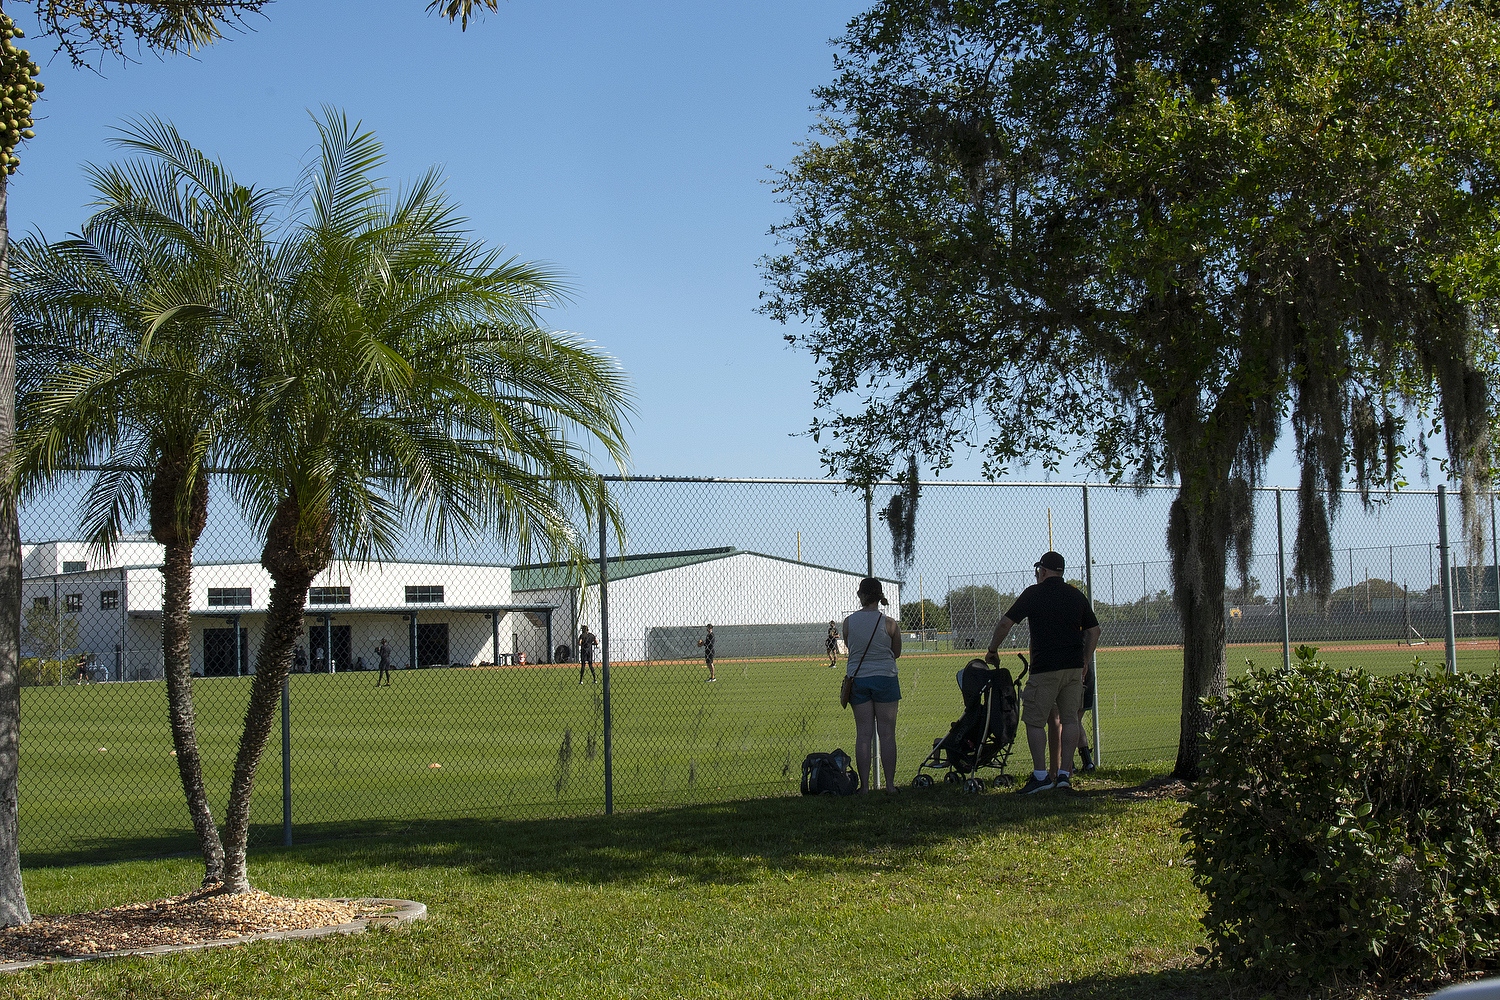 The Blakely families from Warren, PA and Indianapolis, watch Minor Leaguers go through drills at Pirate City in Bradenton.